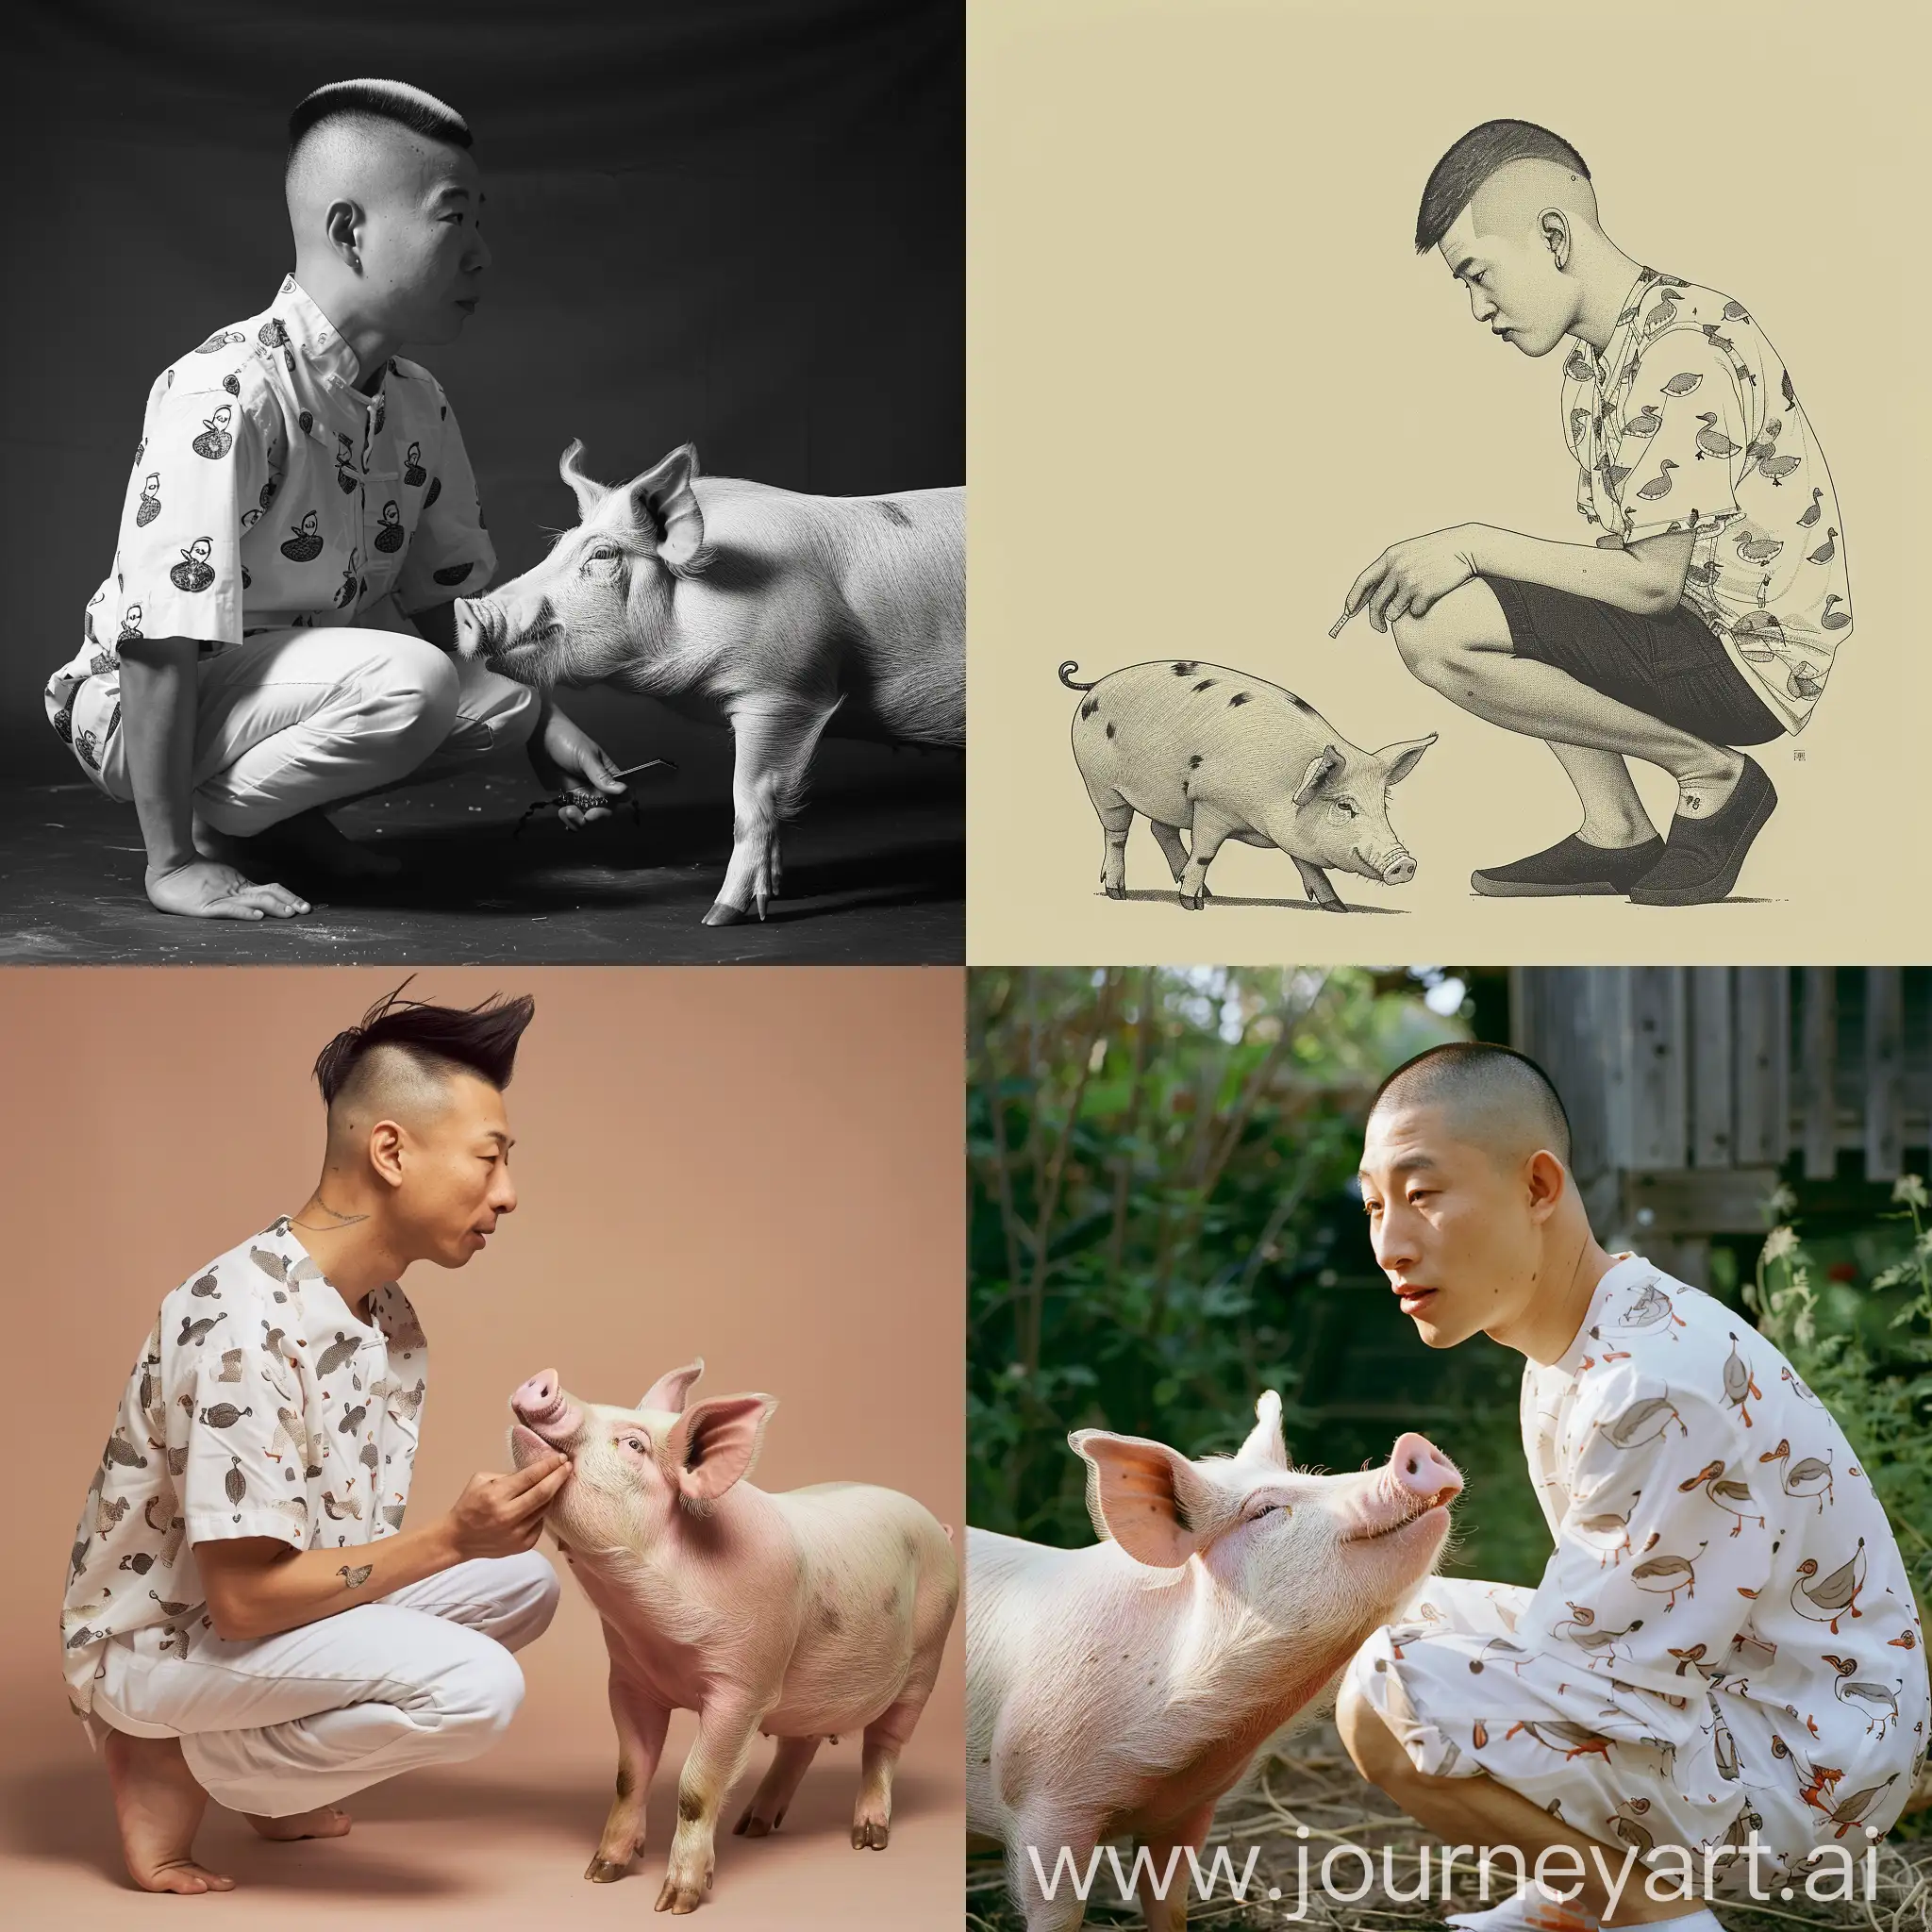 A Chinese man. Inch haircut. Wearing a white shirt with a duck print all over it. Half-squatting. Is teasing a pig.